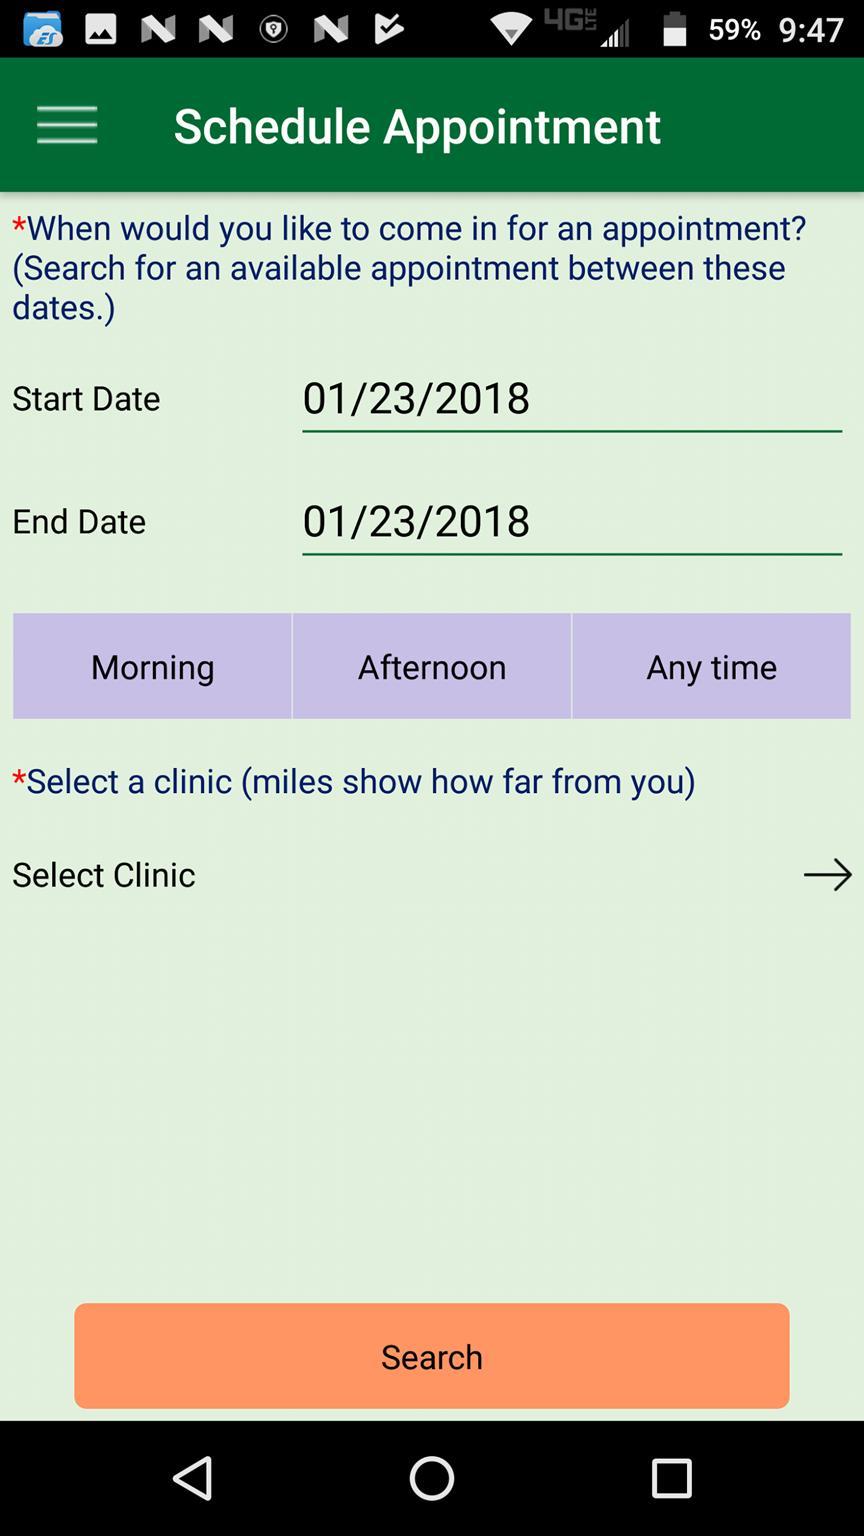 Schedule Appointment View details on upcoming appointments. The Appointments screen displays: The clinic where the appointment is scheduled, including telephone number and address.